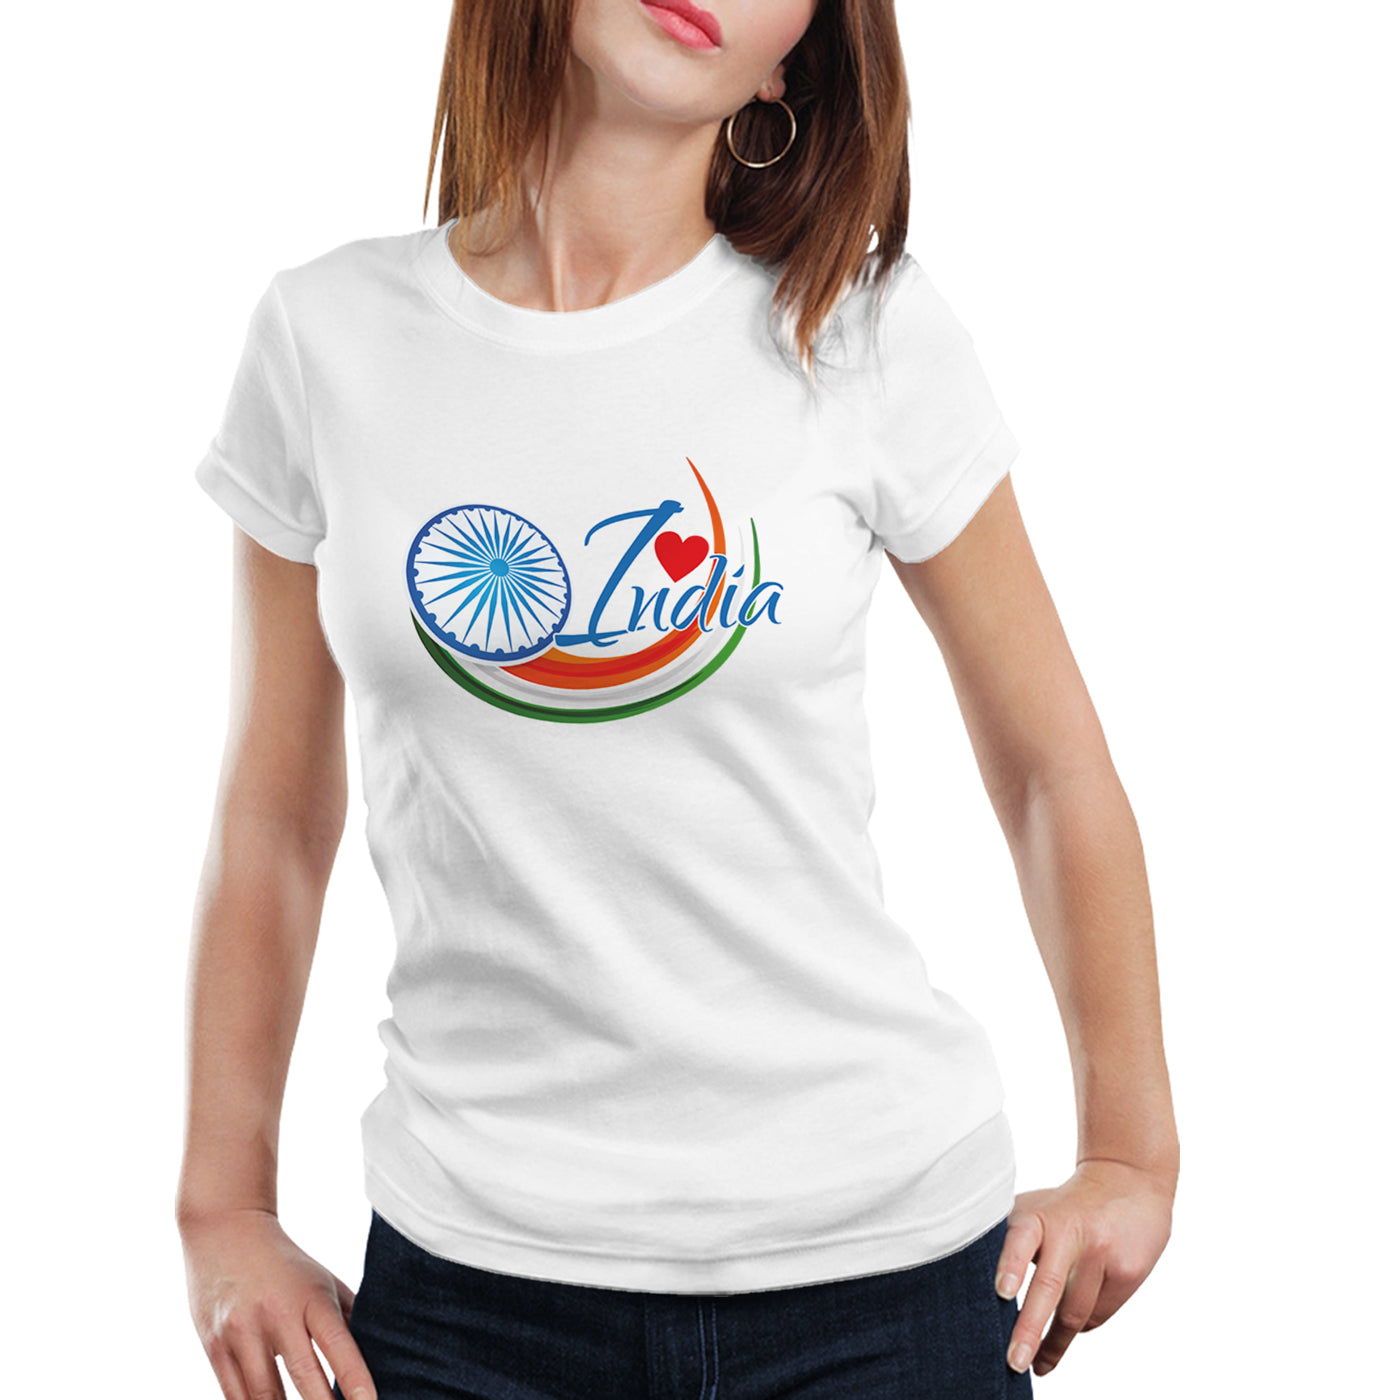 iberry's Independence day t shirt | Republic day t shirts |India t shirts |Patriotic tshirt |15 August t shirts |Round neck cotton tshirts -04